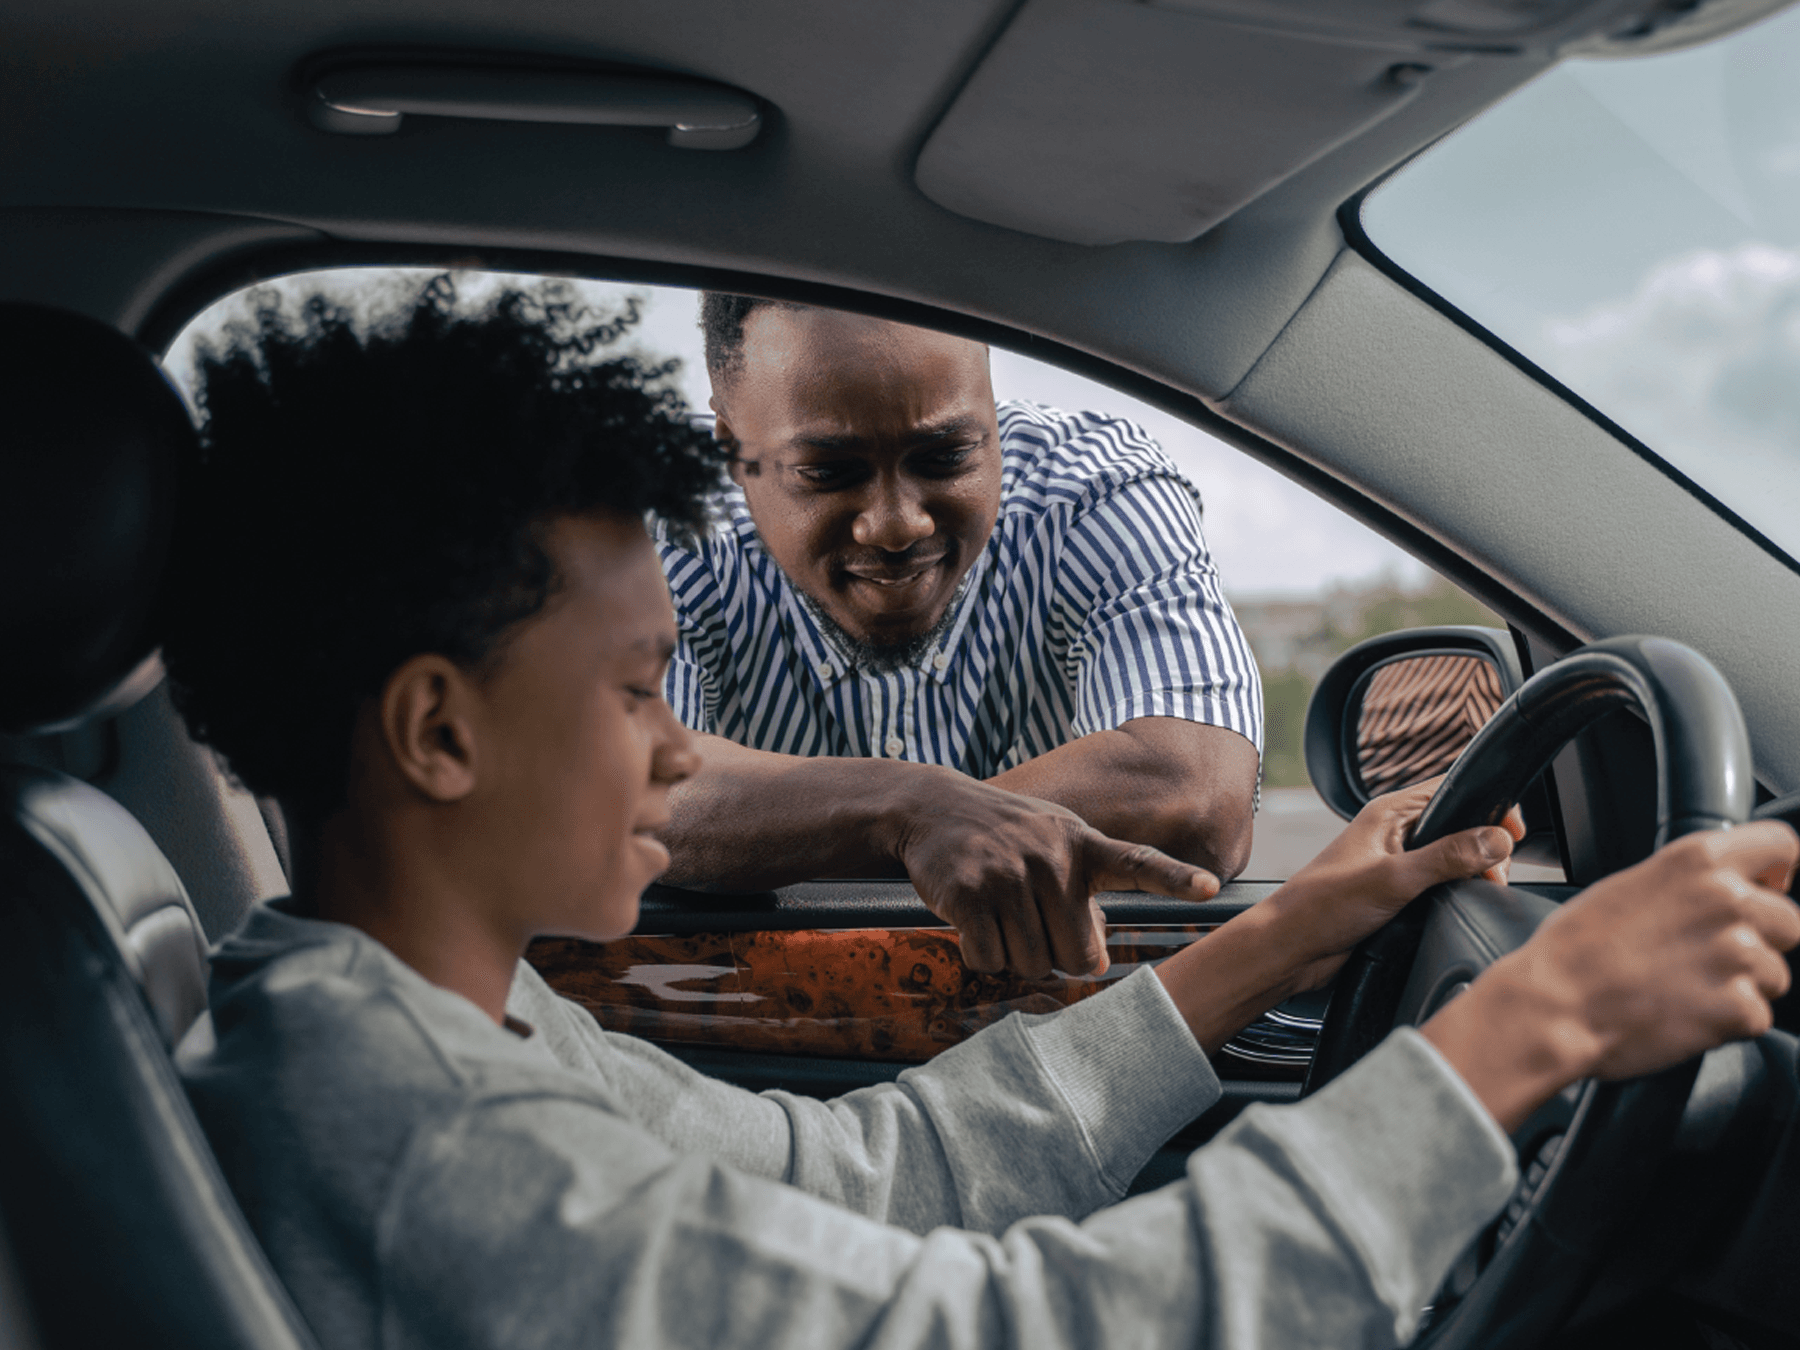 The Research Foundation offers free safe driving class to young drivers